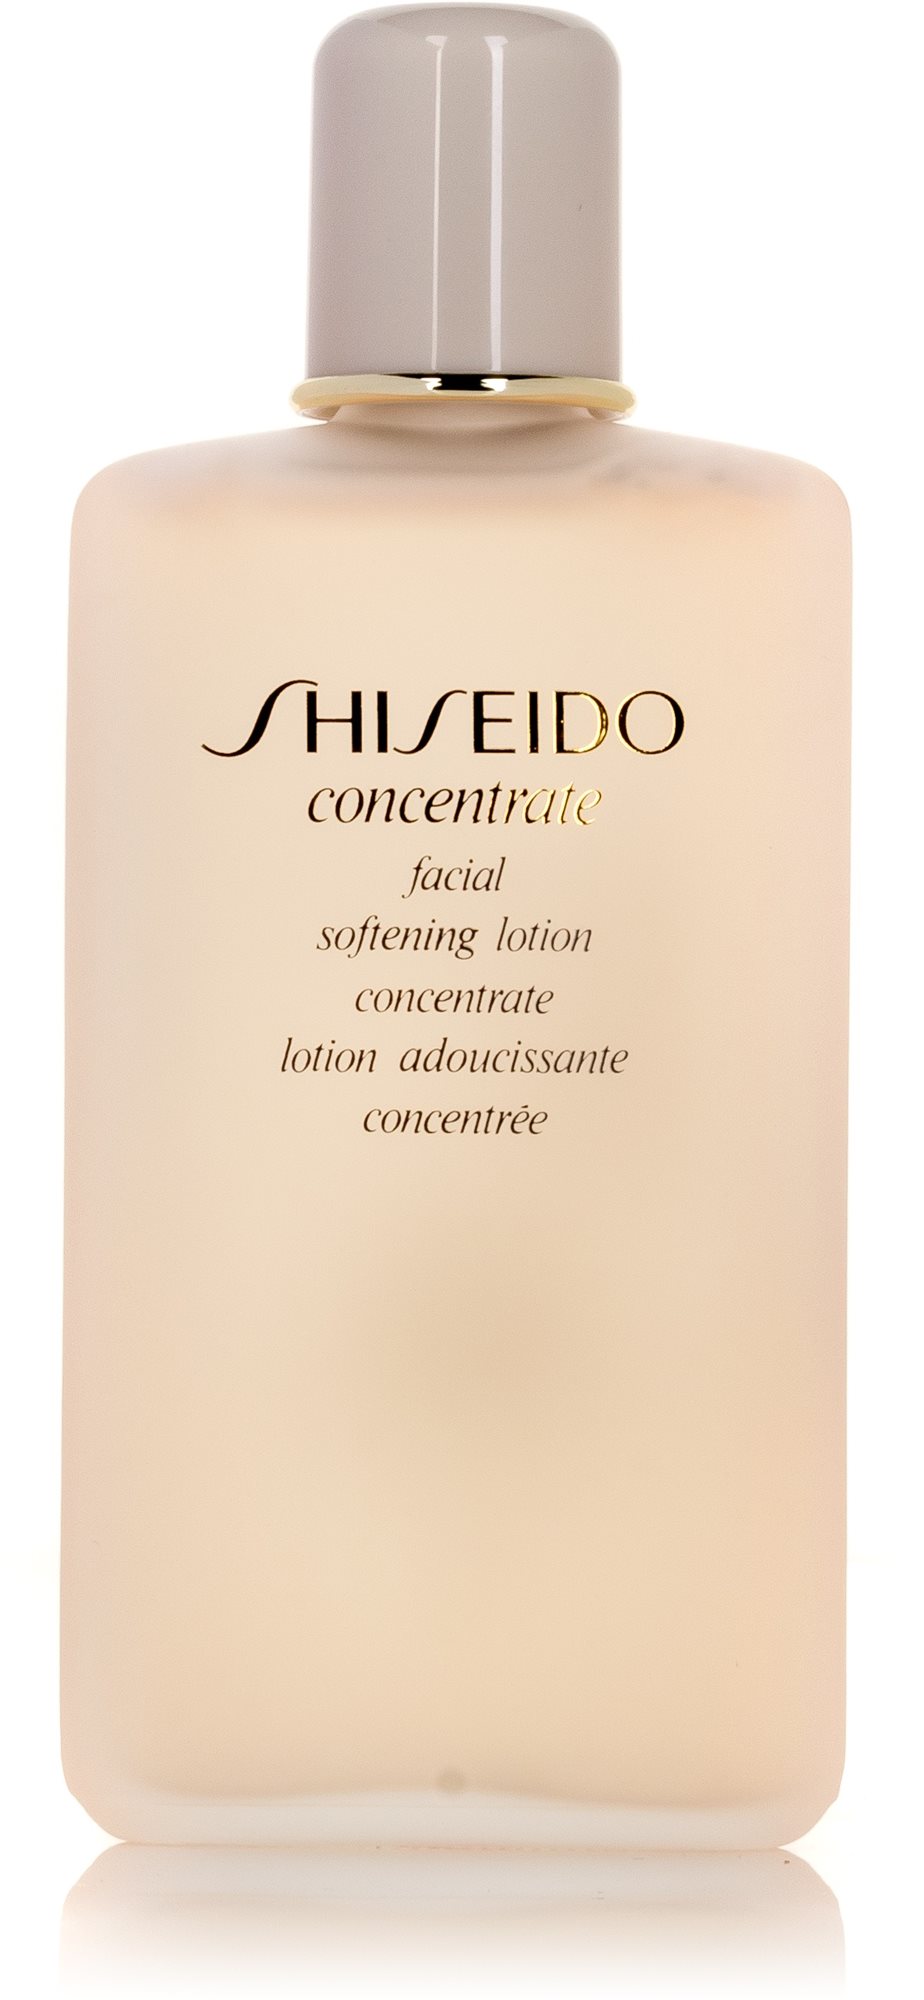 SHISEIDO Concentrate Facial Softening Lotion 150 ml